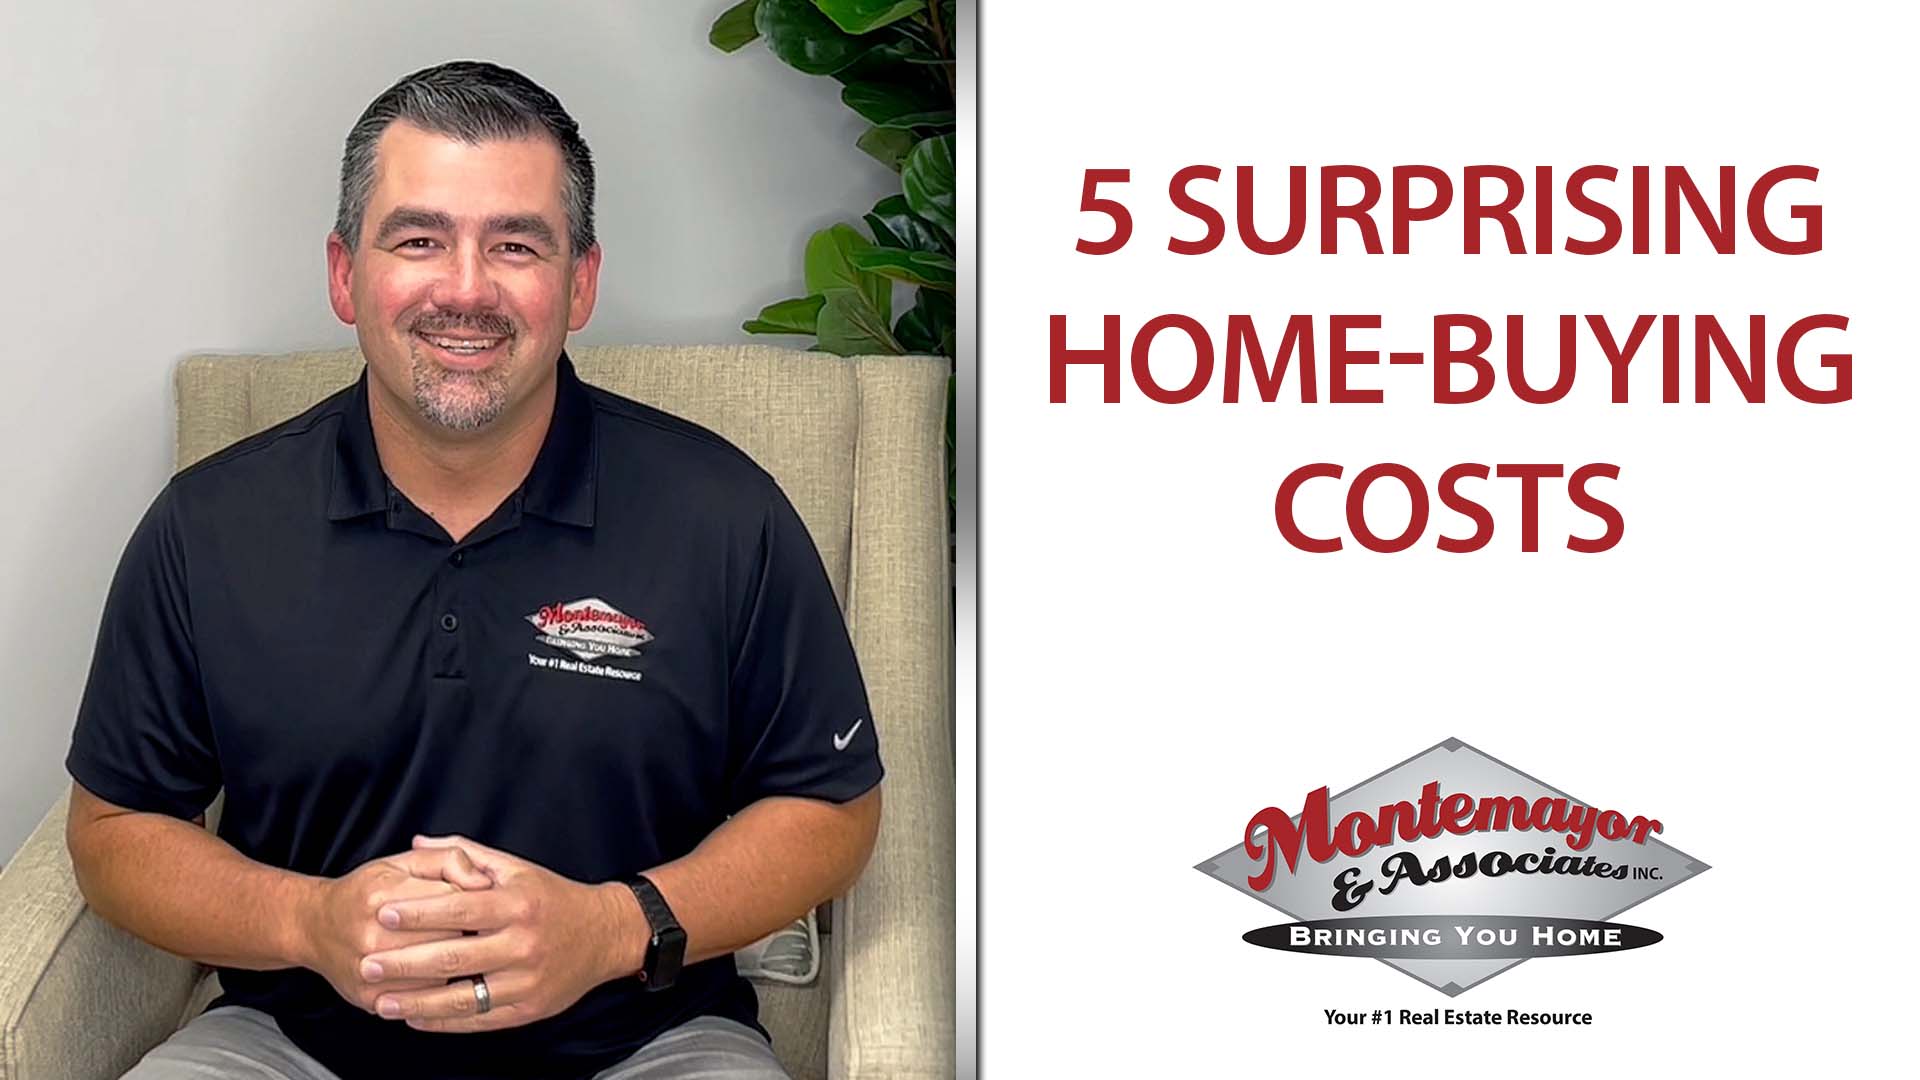 Budget for These 5 Unexpected Home-Buying Costs